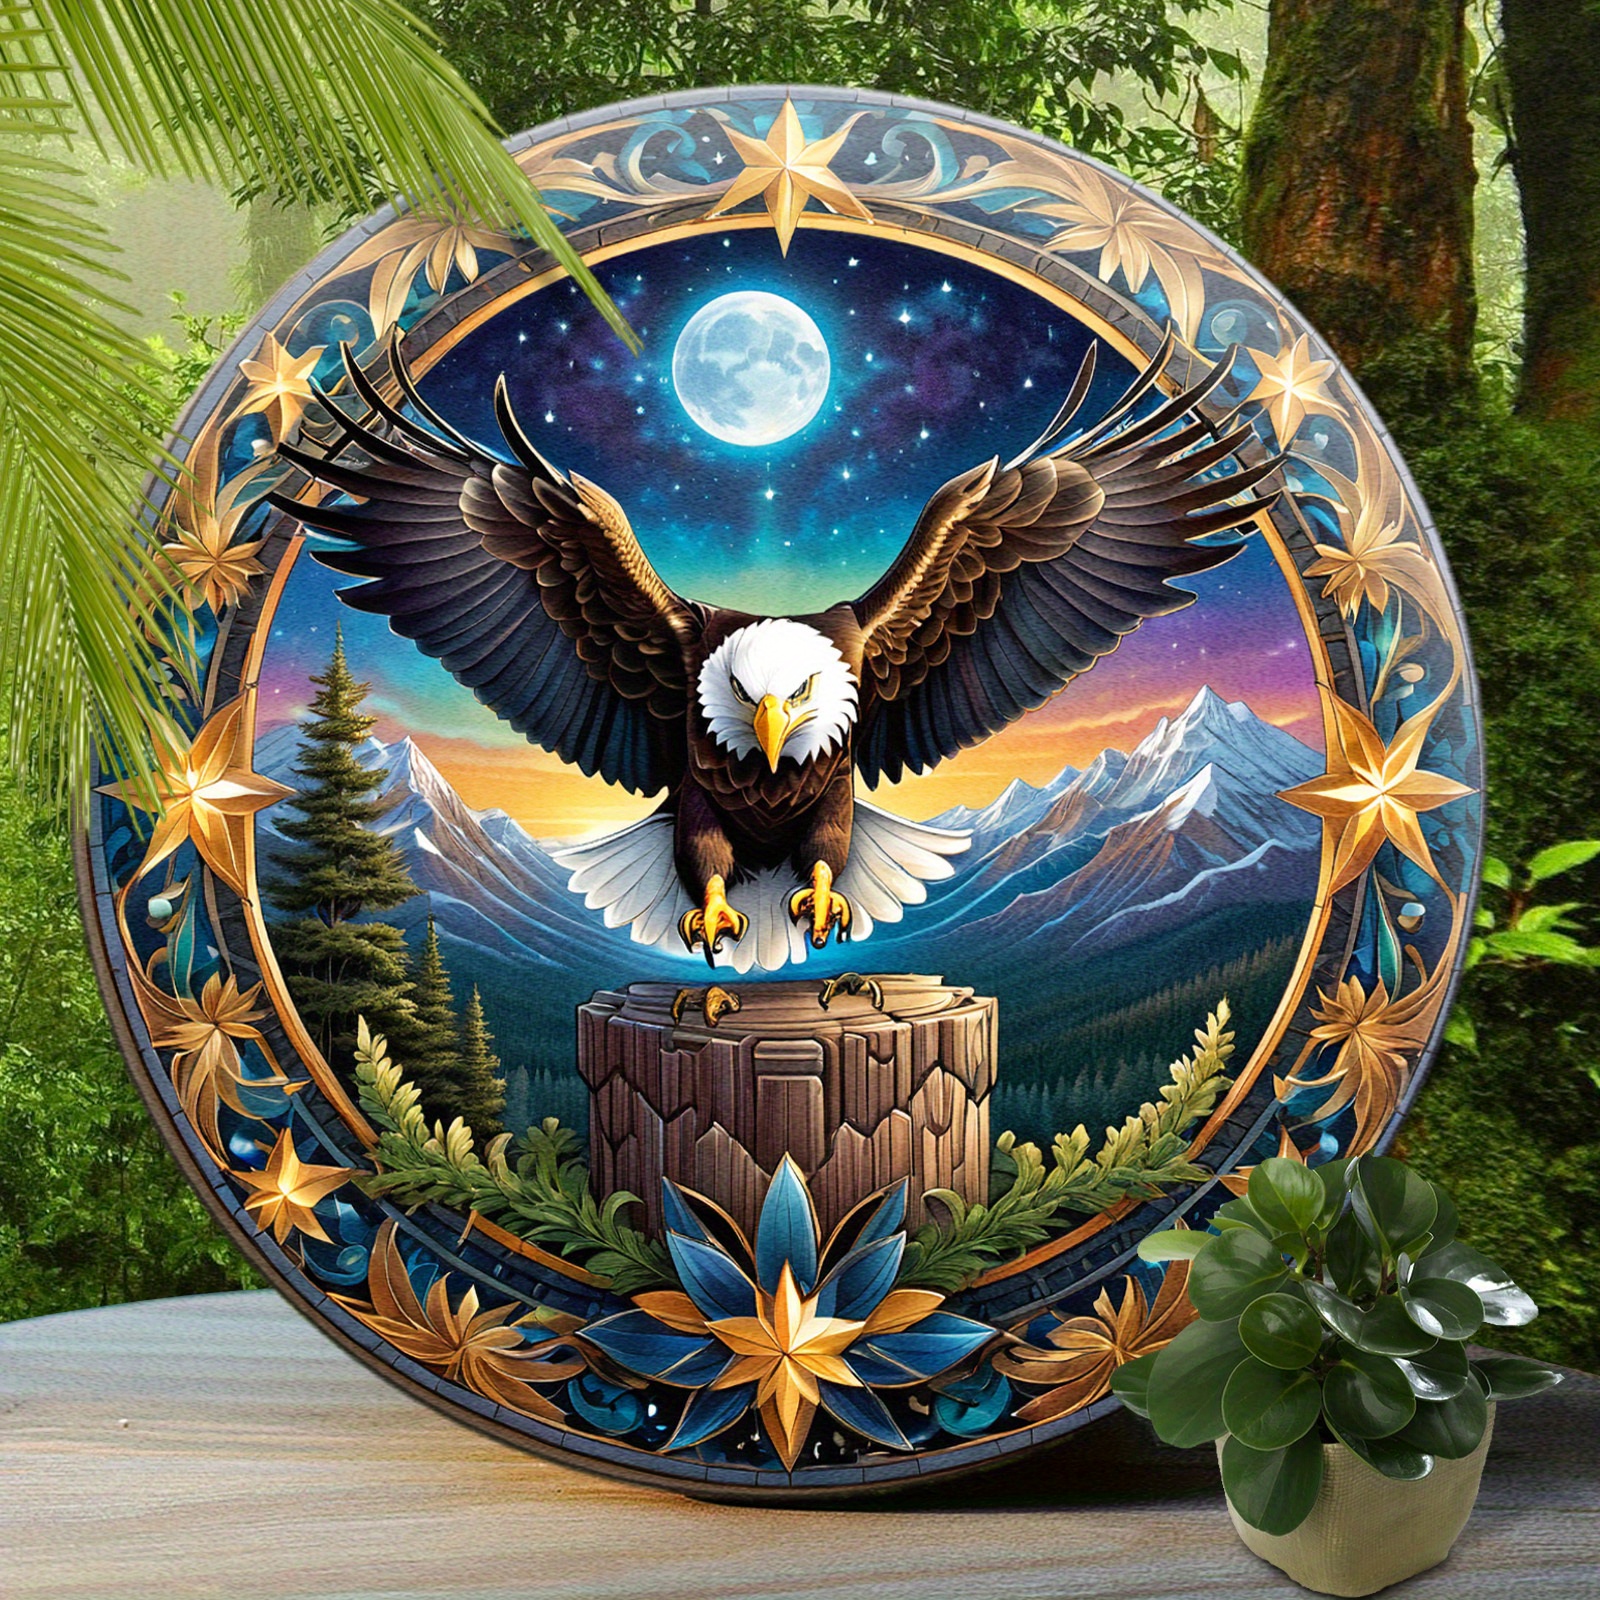 

1pc Round American Bald Eagle Aluminum Sign, Cute Bird Sign, Living Room Wall Decor, Round Fashion Art Aesthetic, Terrace Decor Gift Holiday Gift 8x8 Inch (20x20cm)